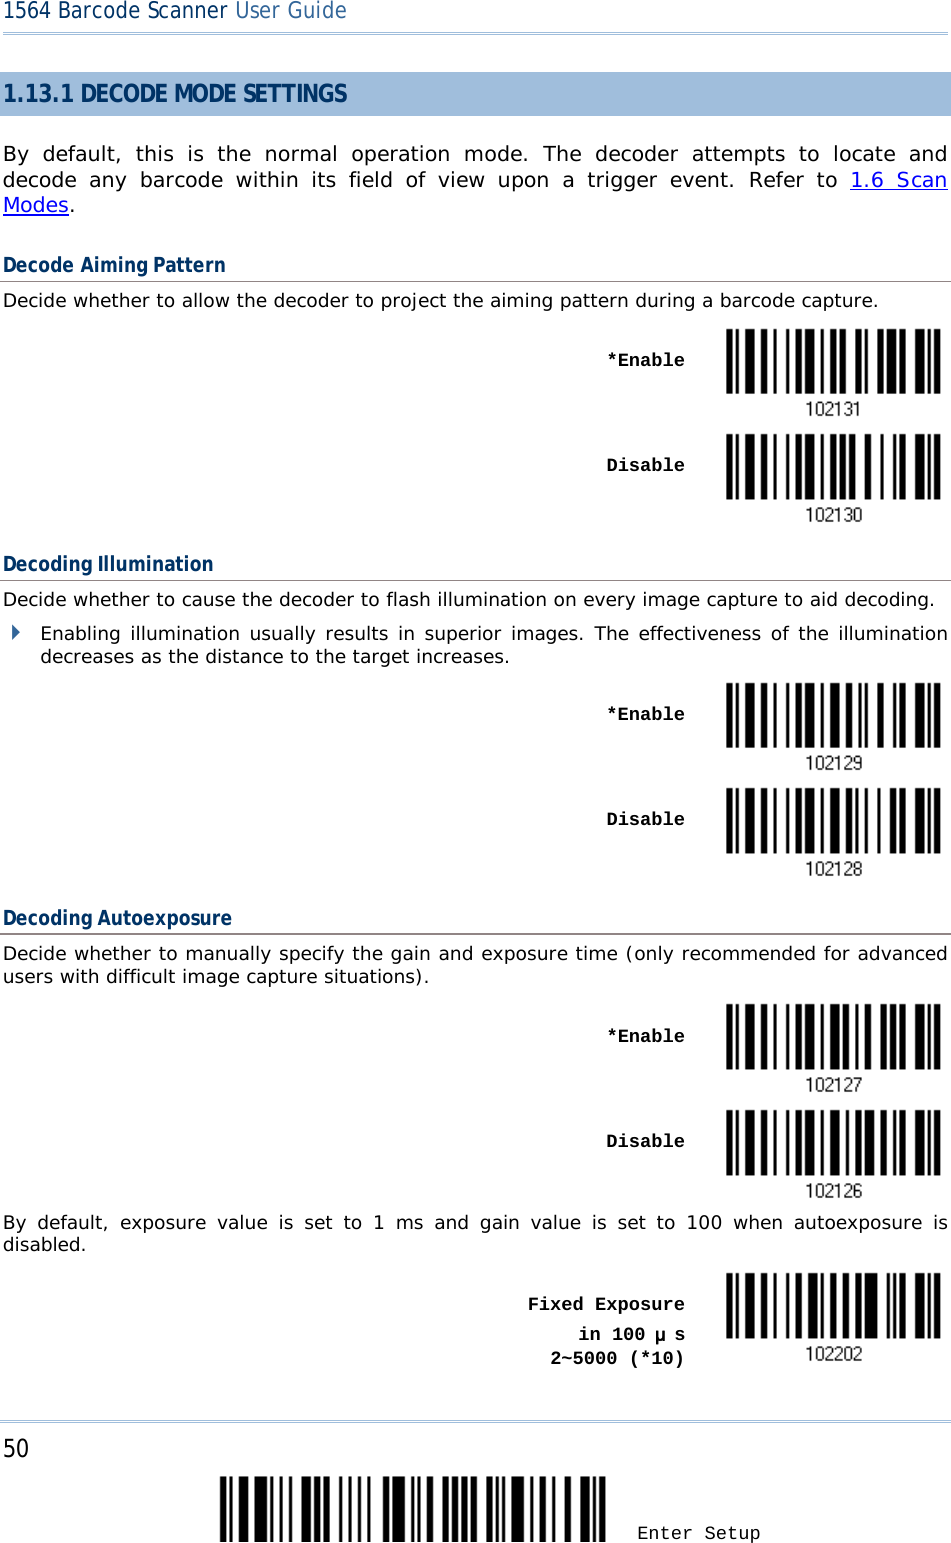 50 Enter Setup 1564 Barcode Scanner User Guide  1.13.1 DECODE MODE SETTINGS By default, this is the normal operation mode. The decoder attempts to locate and decode any barcode within its field of view upon a  trigger event.  Refer to 1.6 Scan Modes. Decode Aiming Pattern Decide whether to allow the decoder to project the aiming pattern during a barcode capture.    *Enable     Disable  Decoding Illumination Decide whether to cause the decoder to flash illumination on every image capture to aid decoding.   Enabling illumination usually results in superior images. The effectiveness of the illumination decreases as the distance to the target increases.      *Enable     Disable  Decoding Autoexposure Decide whether to manually specify the gain and exposure time (only recommended for advanced users with difficult image capture situations).    *Enable       Disable  By default, exposure value is set to 1 ms and gain value is set to 100 when autoexposure is disabled.    Fixed Exposure     in 100 μs      2~5000 (*10)  